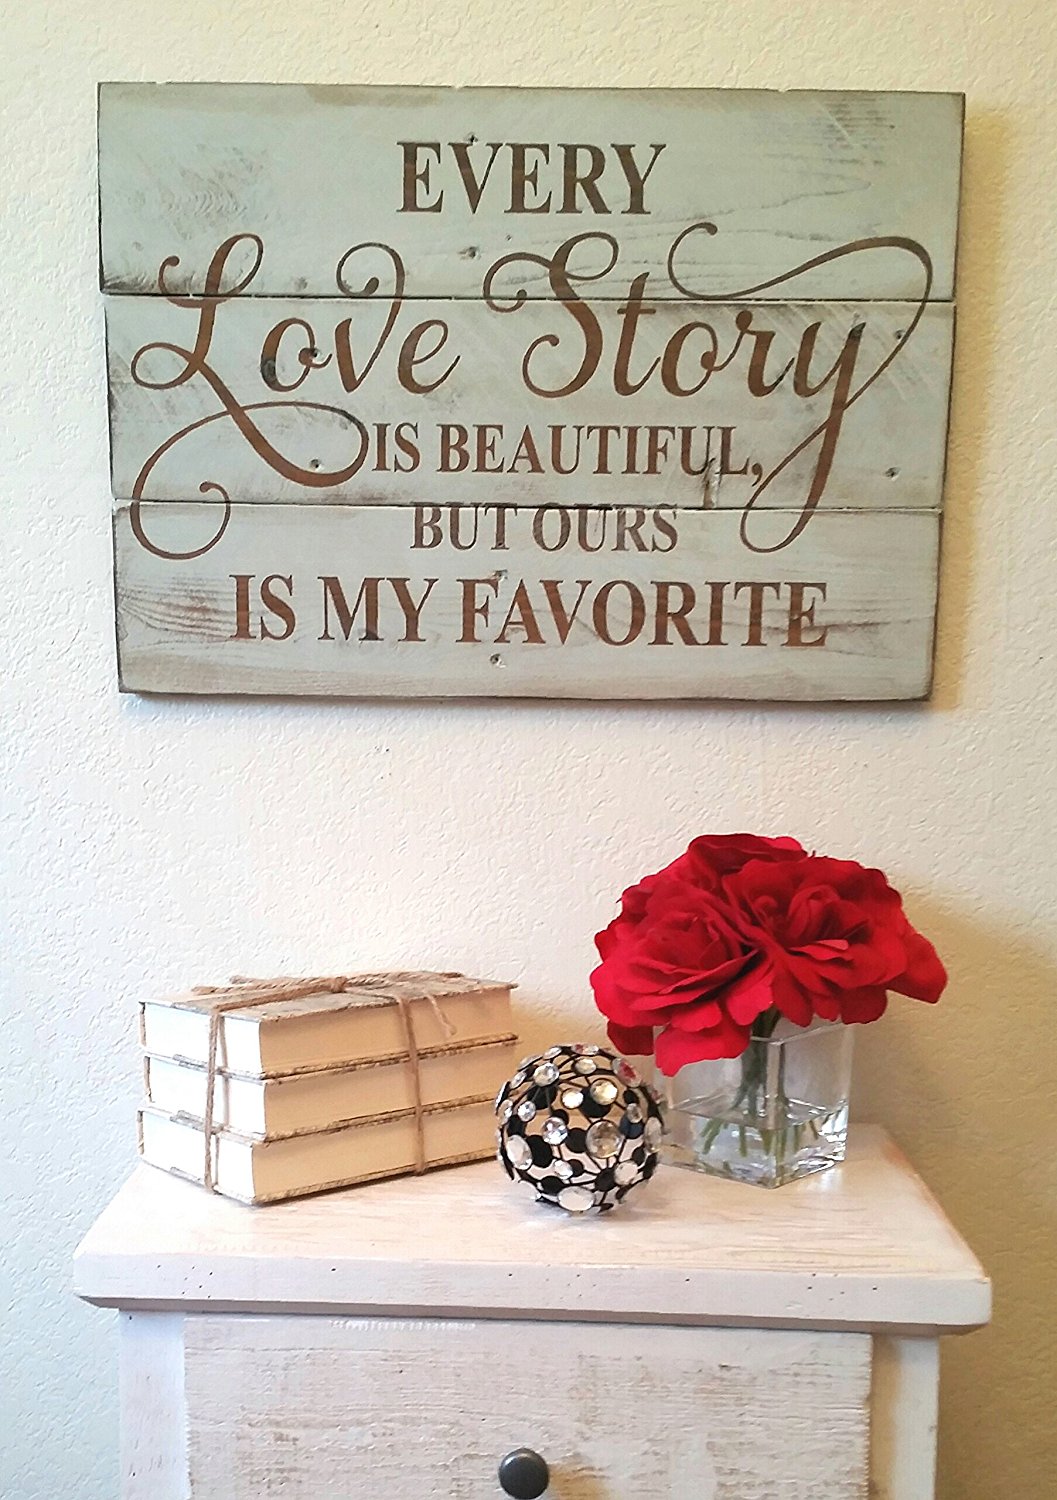 Love story quote wall hanging - cute for a rustic / shabby chic style bedroom or any room - diy rustic decor idea